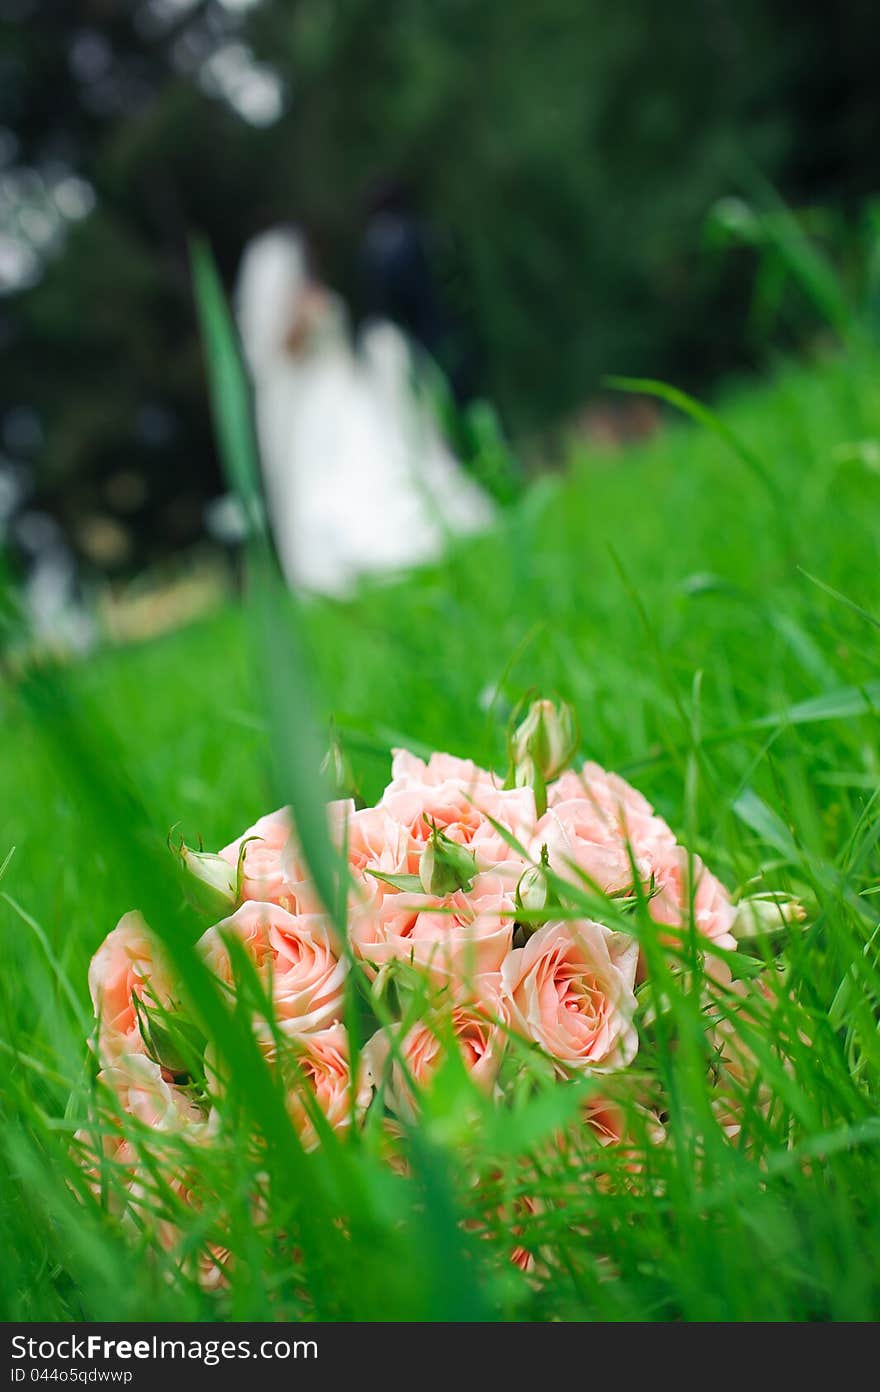 Wedding bouquet of roses laying in grass against enamoured pair